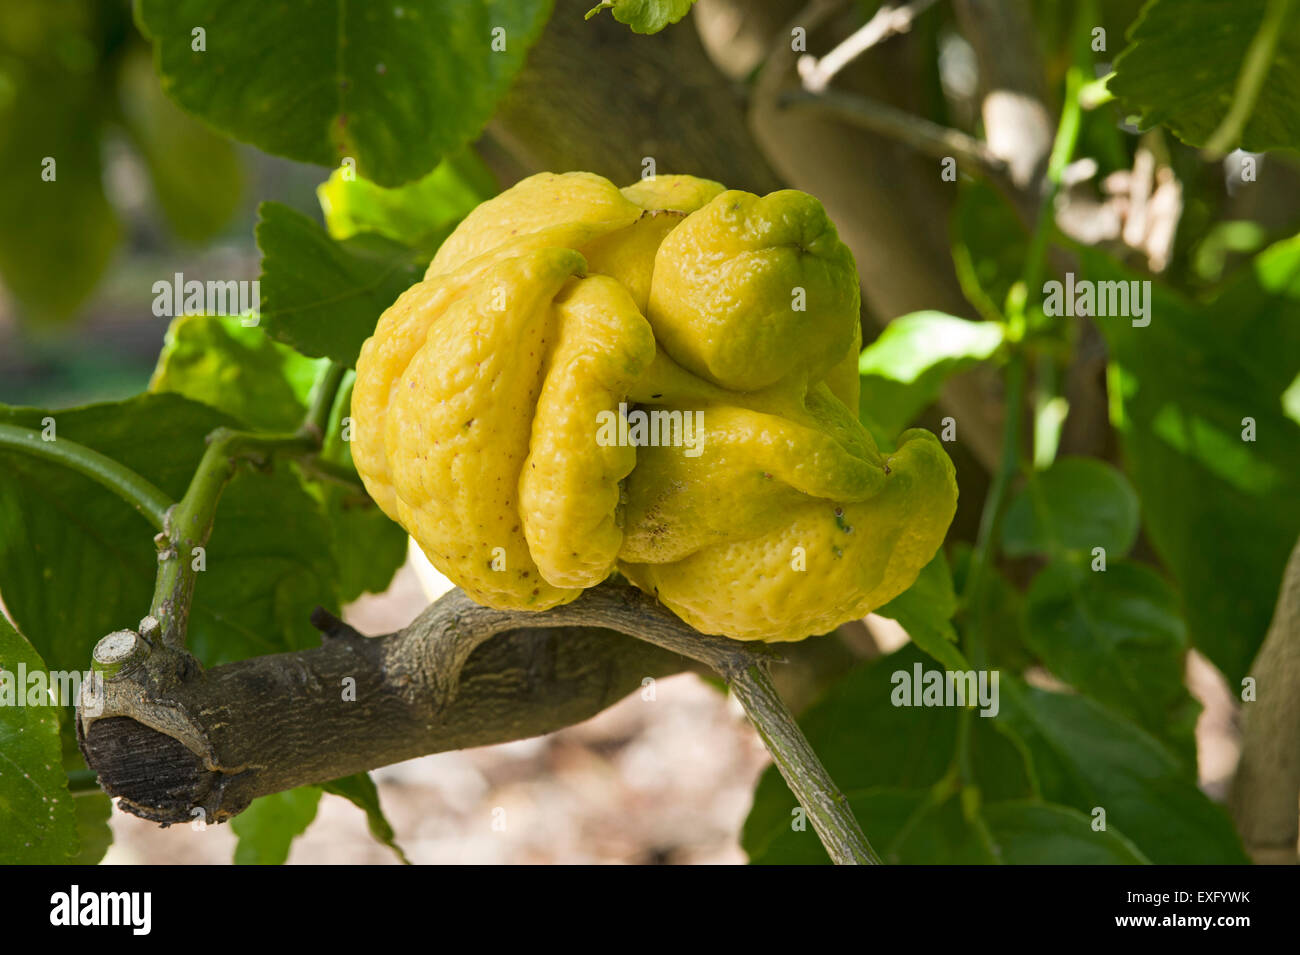 Grossly distorted lemon fruit caused by citrus bud mite Stock Photo